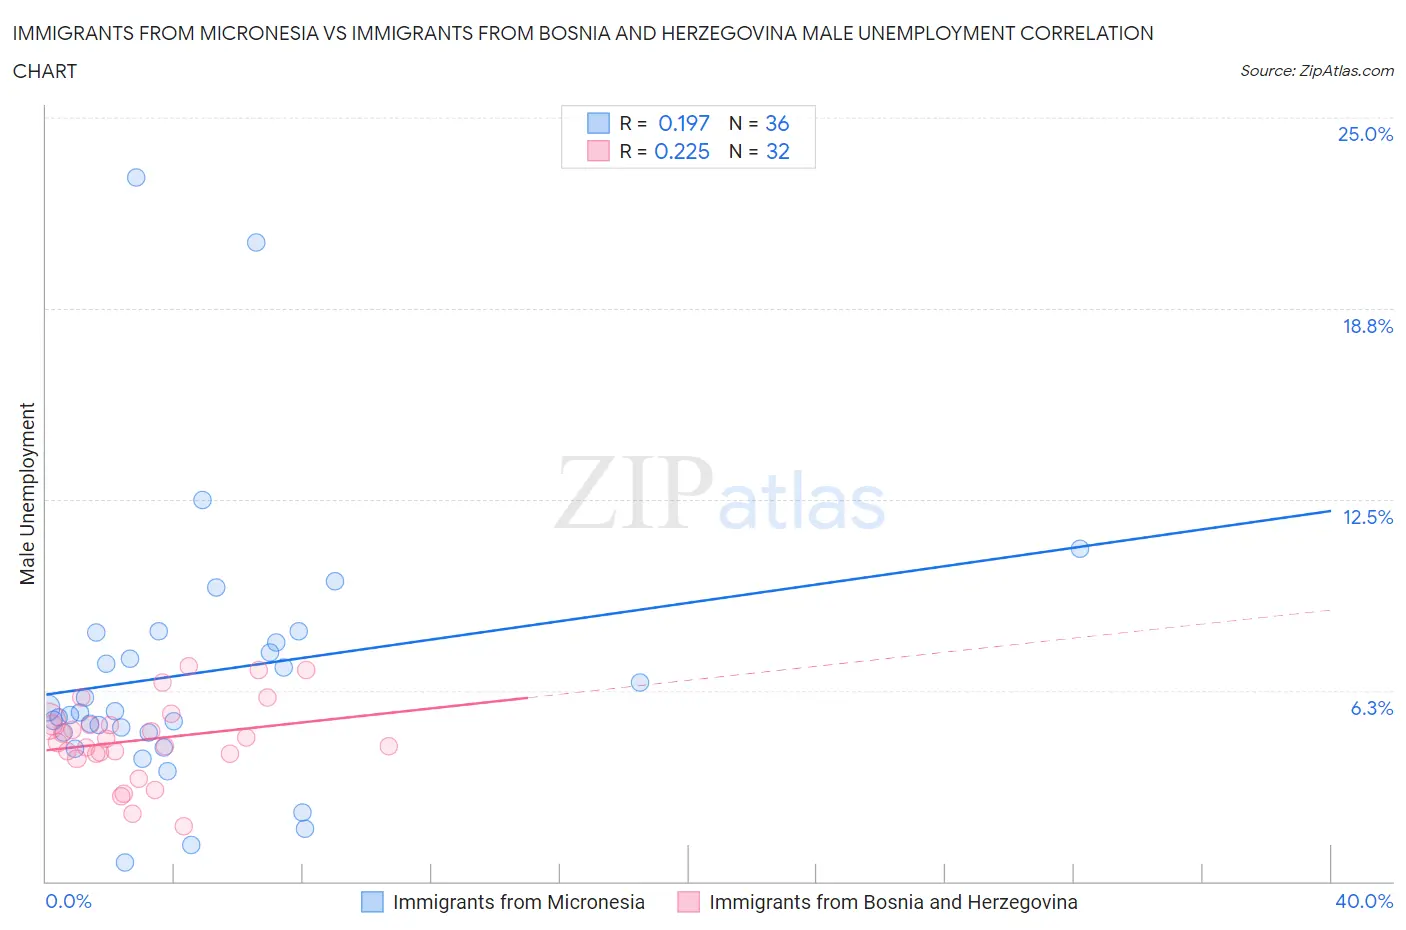 Immigrants from Micronesia vs Immigrants from Bosnia and Herzegovina Male Unemployment